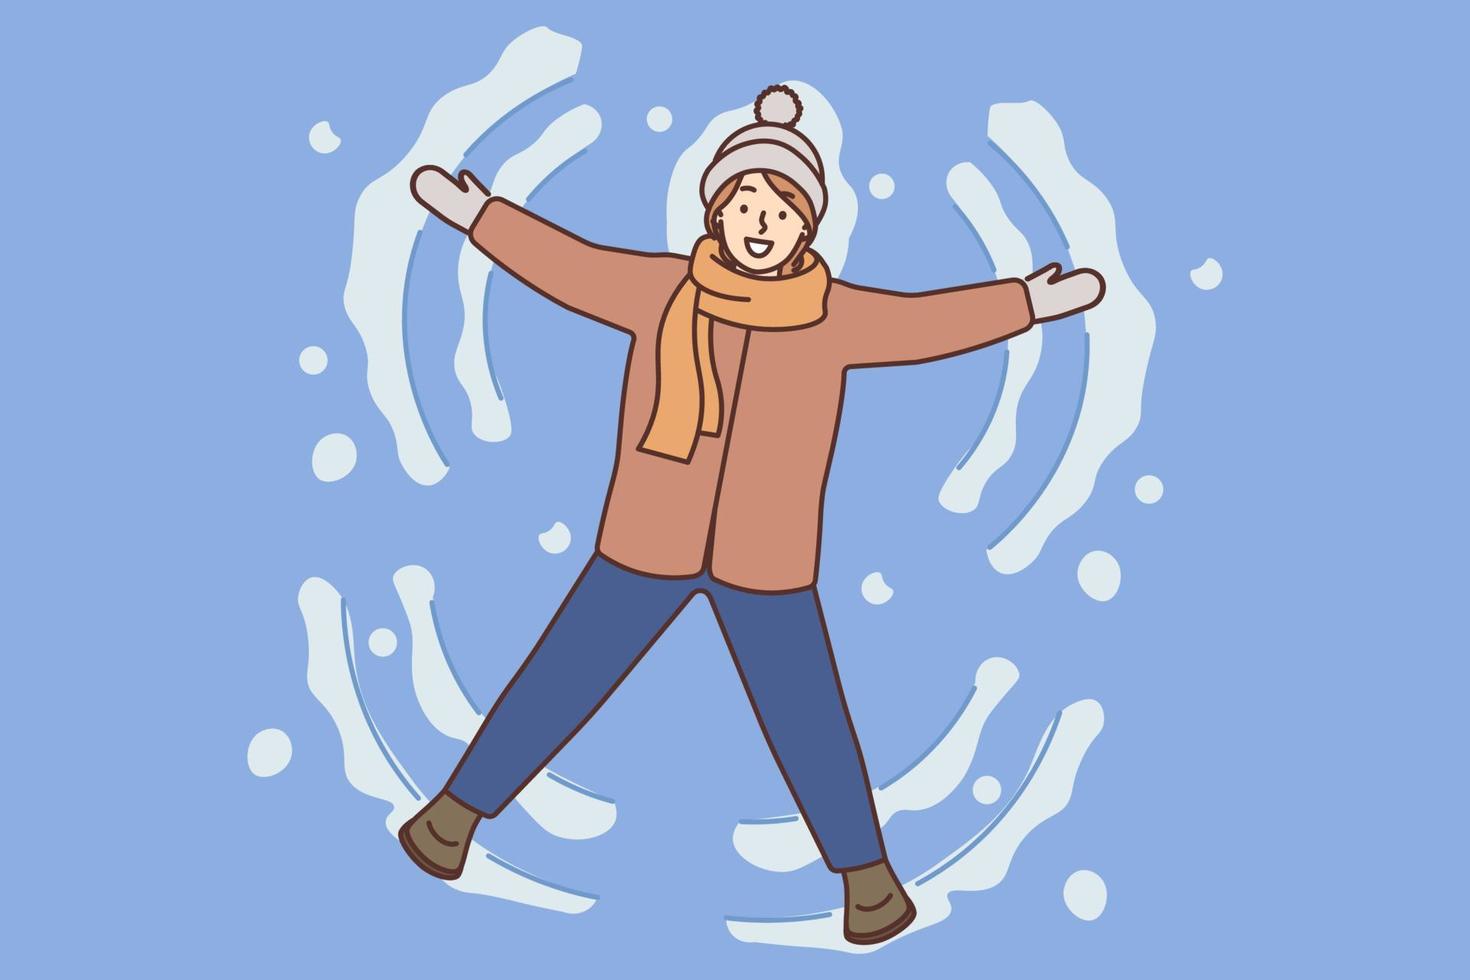 Smiling girl lying on ground making snow angel. Happy child have fun enjoy leisure activity on winter holidays. Vector illustration.